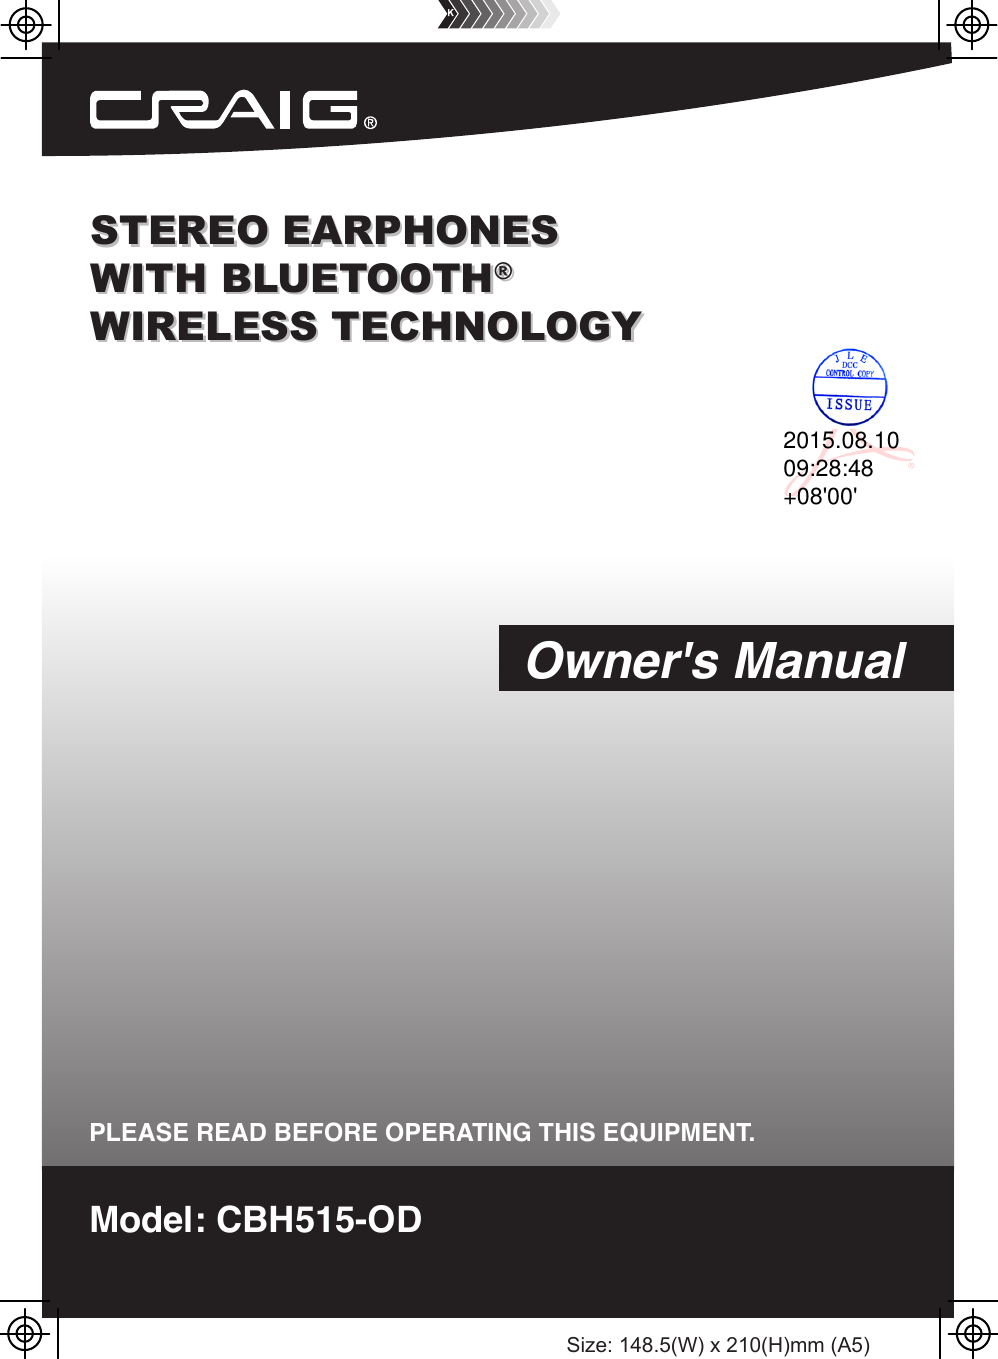 Size: 148.5(W) x 210(H)mm (A5)STEREO EARPHONES WITH BLUETOOTH® WIRELESS TECHNOLOGYSTEREO EARPHONES WITH BLUETOOTH® WIRELESS TECHNOLOGYModel: CBH515-ODPLEASE READ BEFORE OPERATING THIS EQUIPMENT.Owner&apos;s Manual2015.08.1009:28:48+08&apos;00&apos;